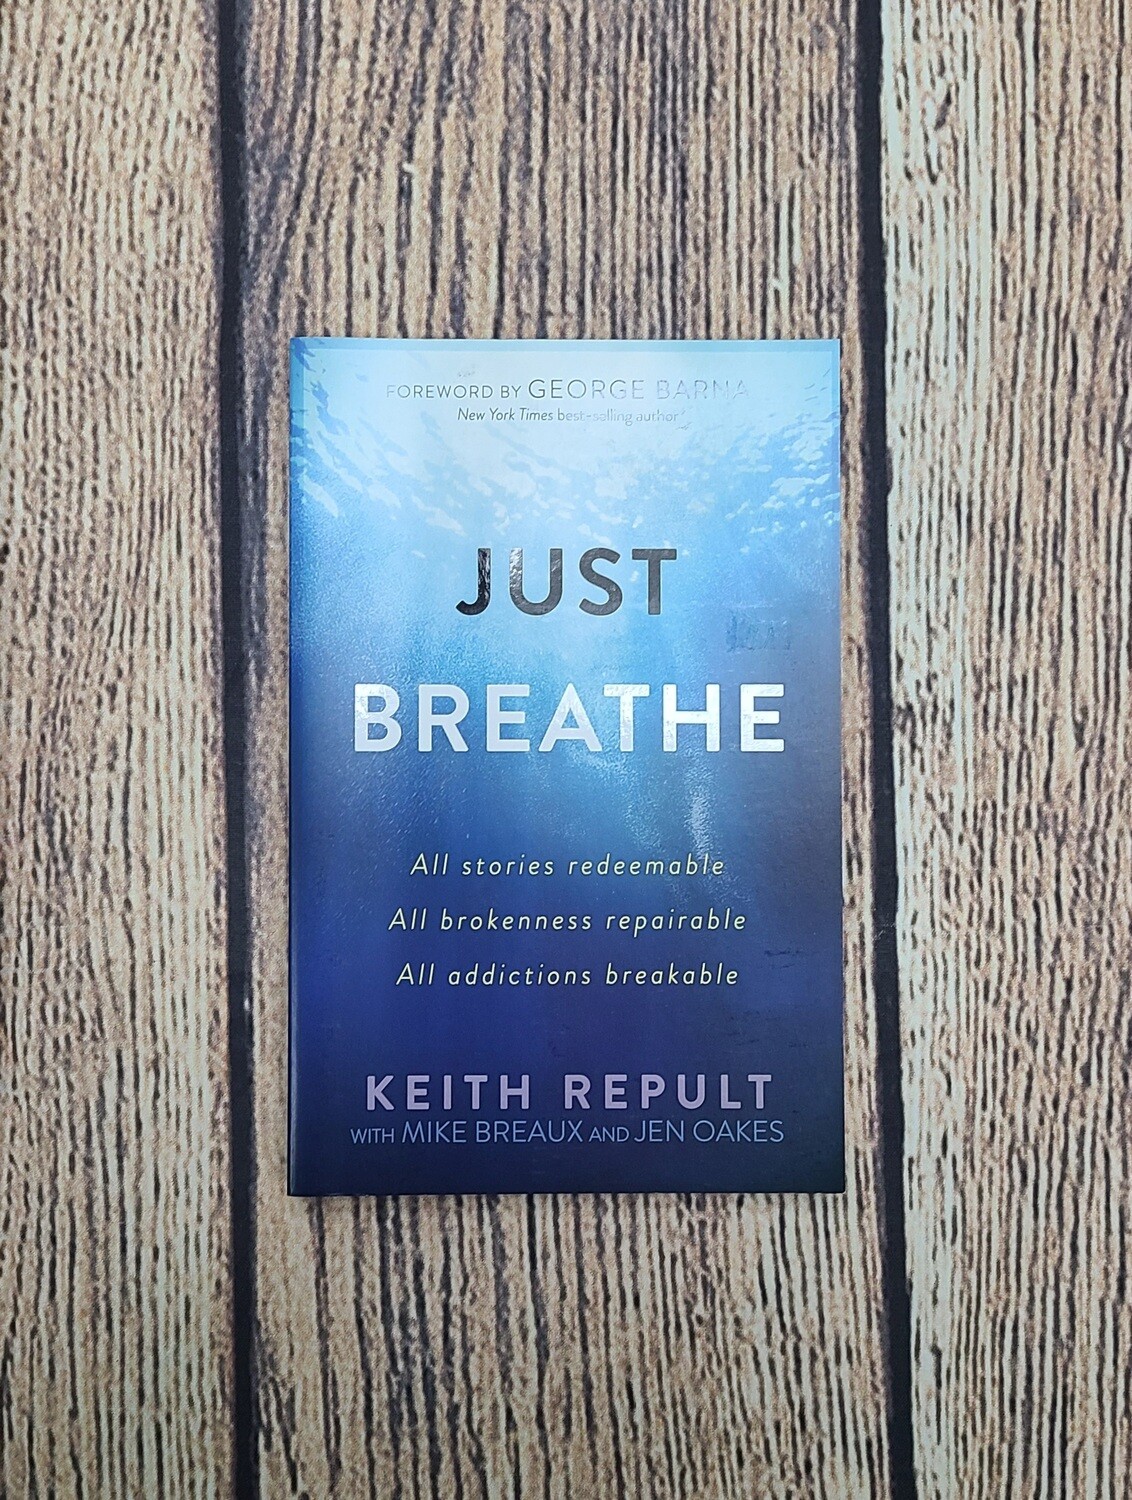 Just Breathe by Keith Repult with Mike Breaux and Jen Oakes